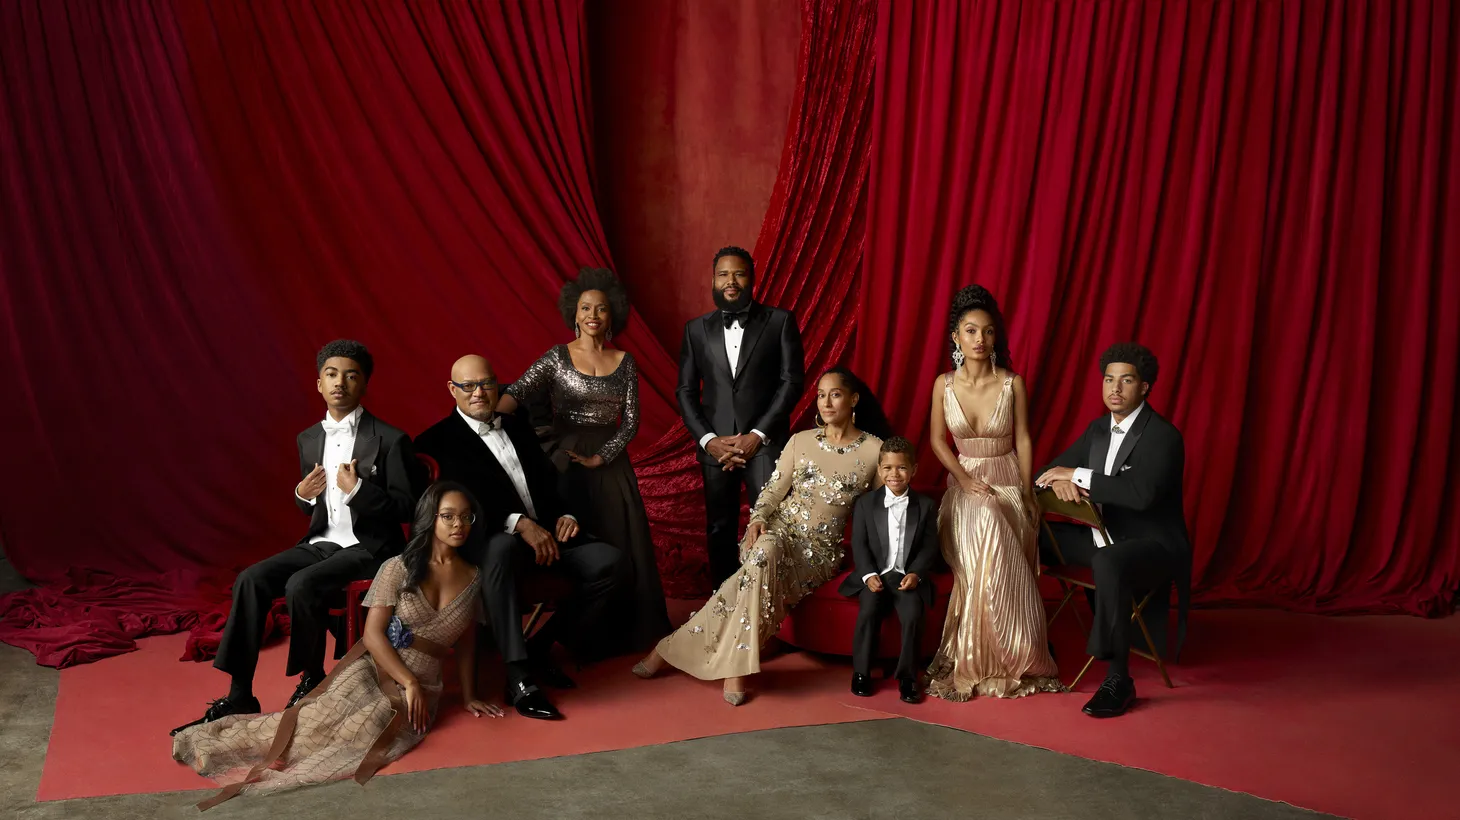 The “Black-ish” cast includes Miles Brown, Marsai Martin, Laurence Fishburne, Jenifer Lewis, Anthony Anderson, Tracee Ellis Ross, August and Berlin Gross, Yara Shahidi, and Marcus Scribner.